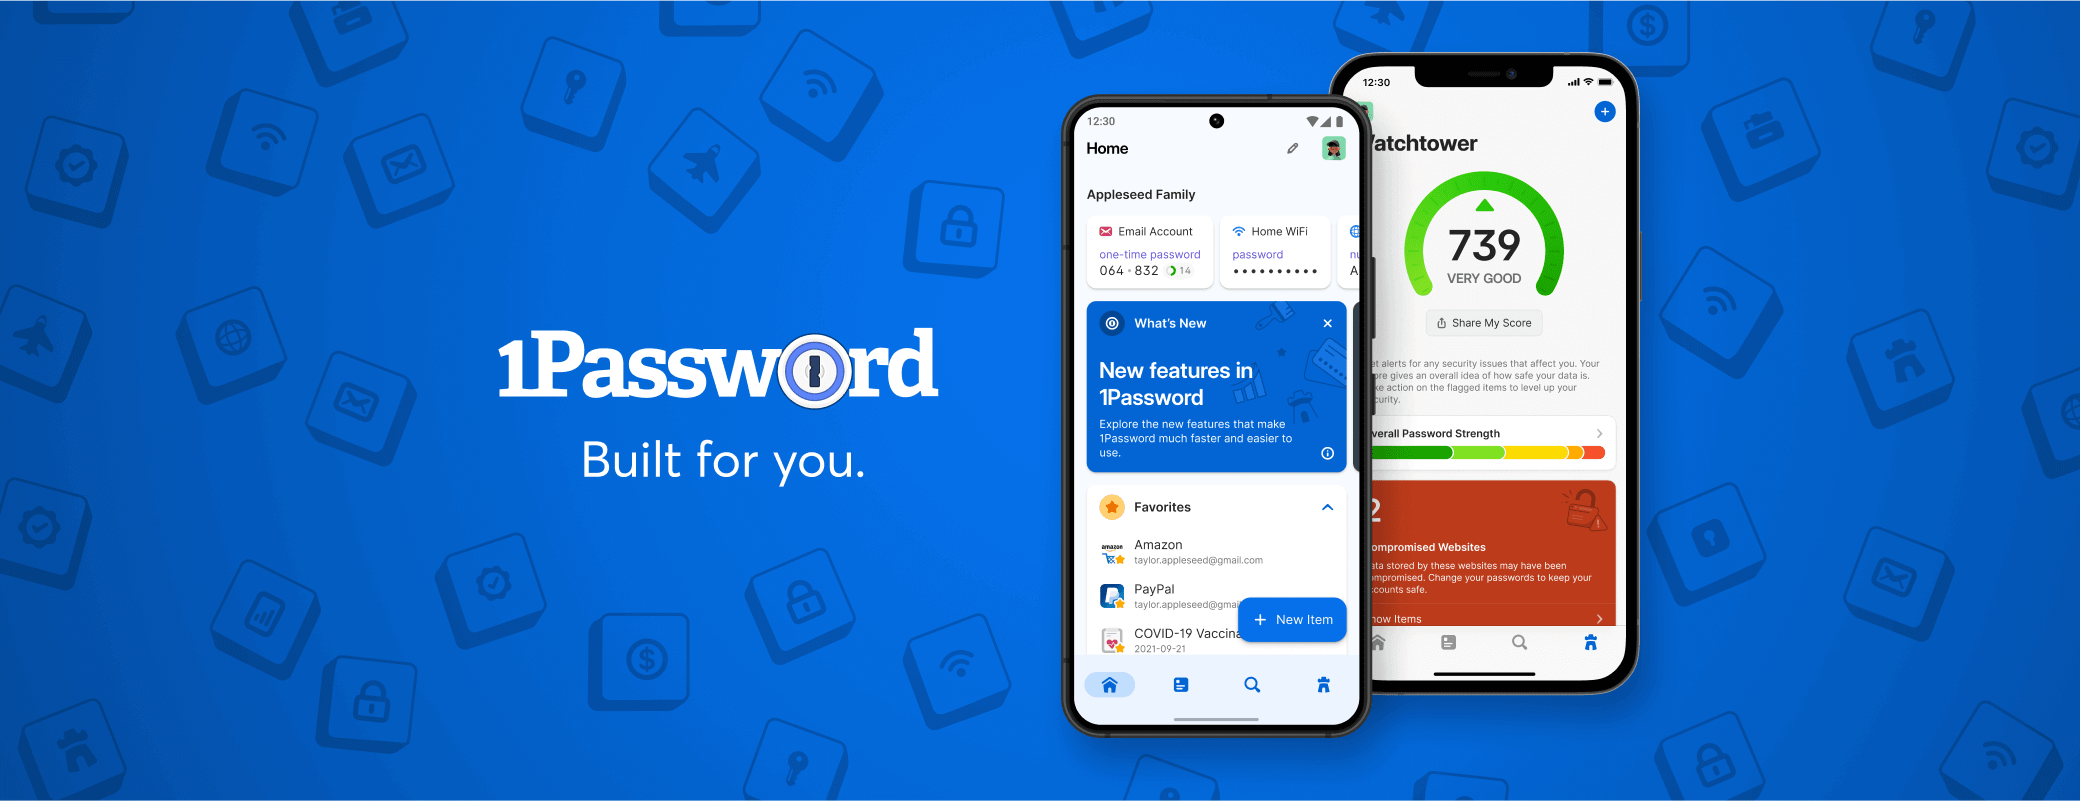 Say hello to 1Password 8 for iOS and Android